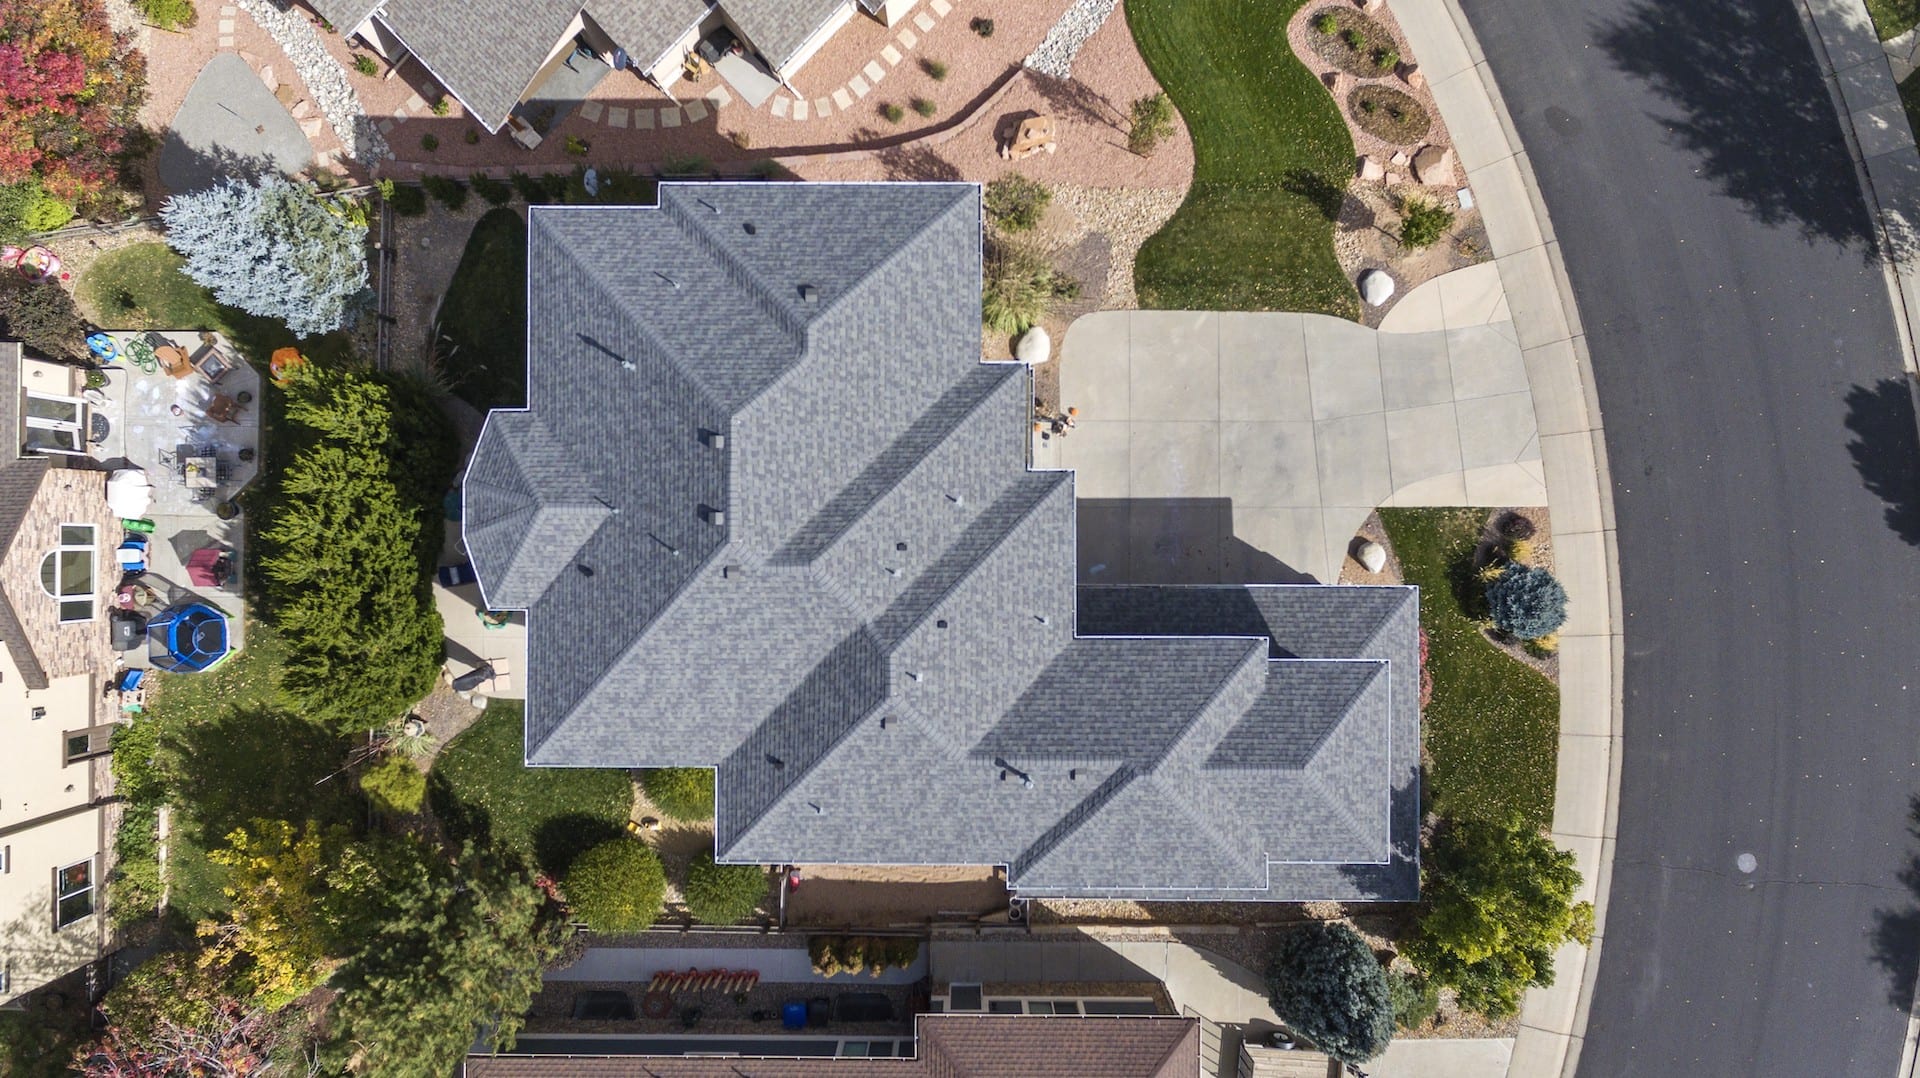 Owens Corning Duration Storm Roofing - Estate Grey asphalt shingles installed by Northern Lights Exteriors